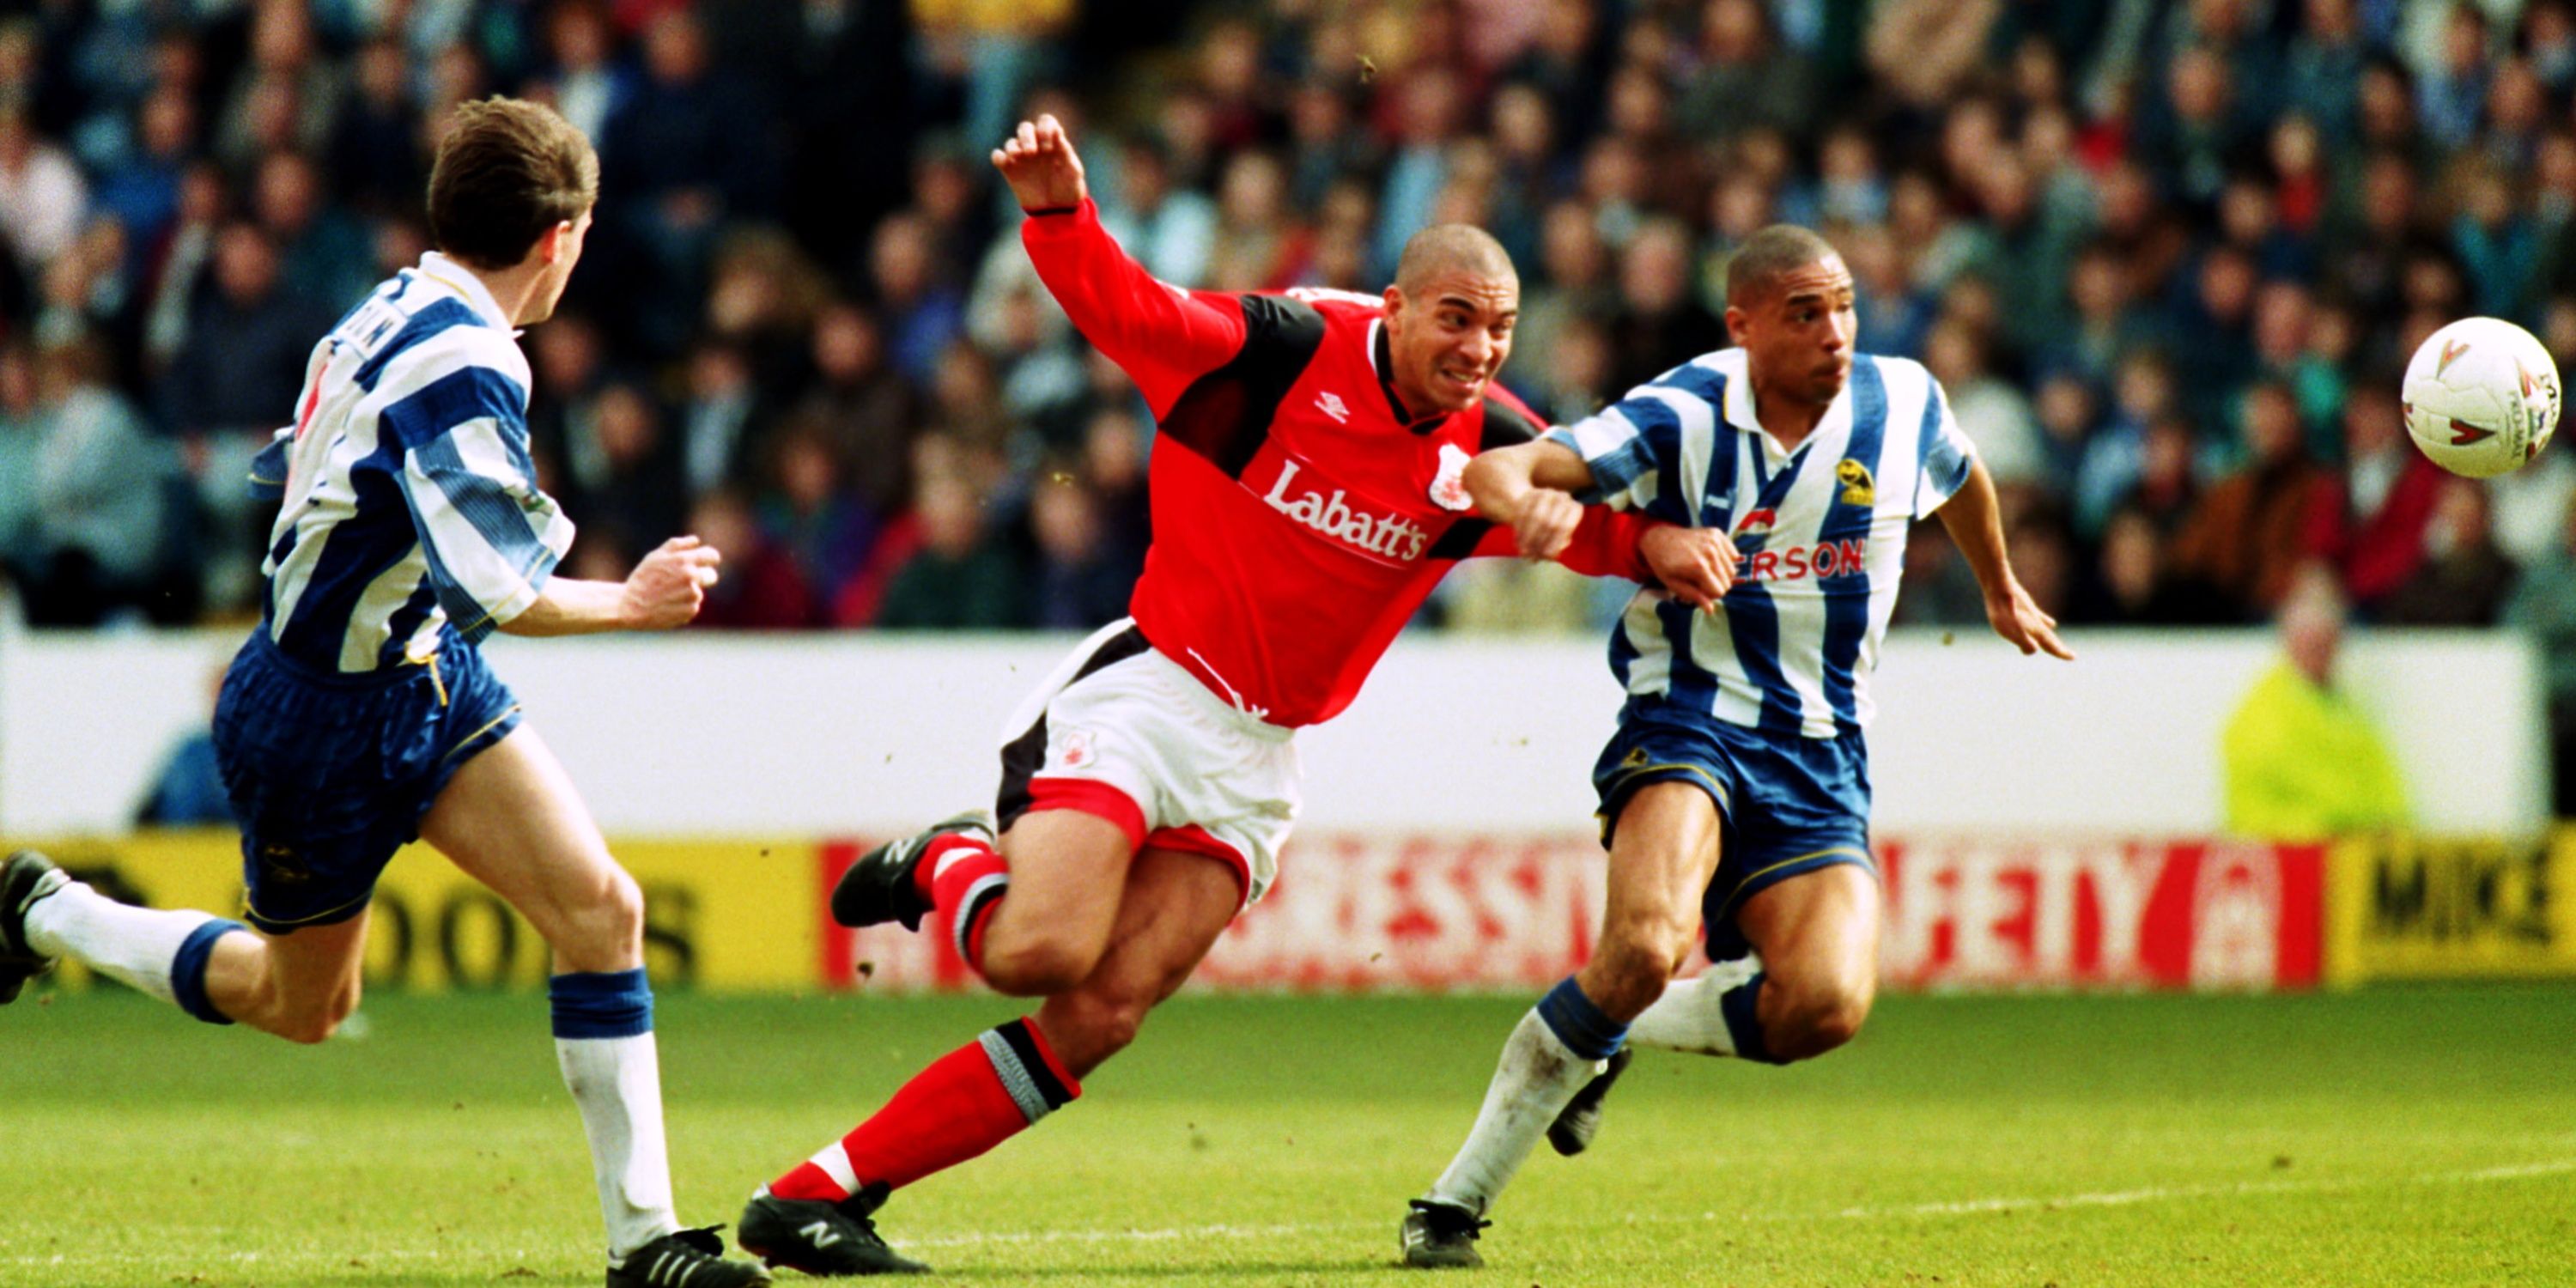 Nottingham Forest's Stan Collymore competes the ball with Sheffield Wednesday's Des Walker.